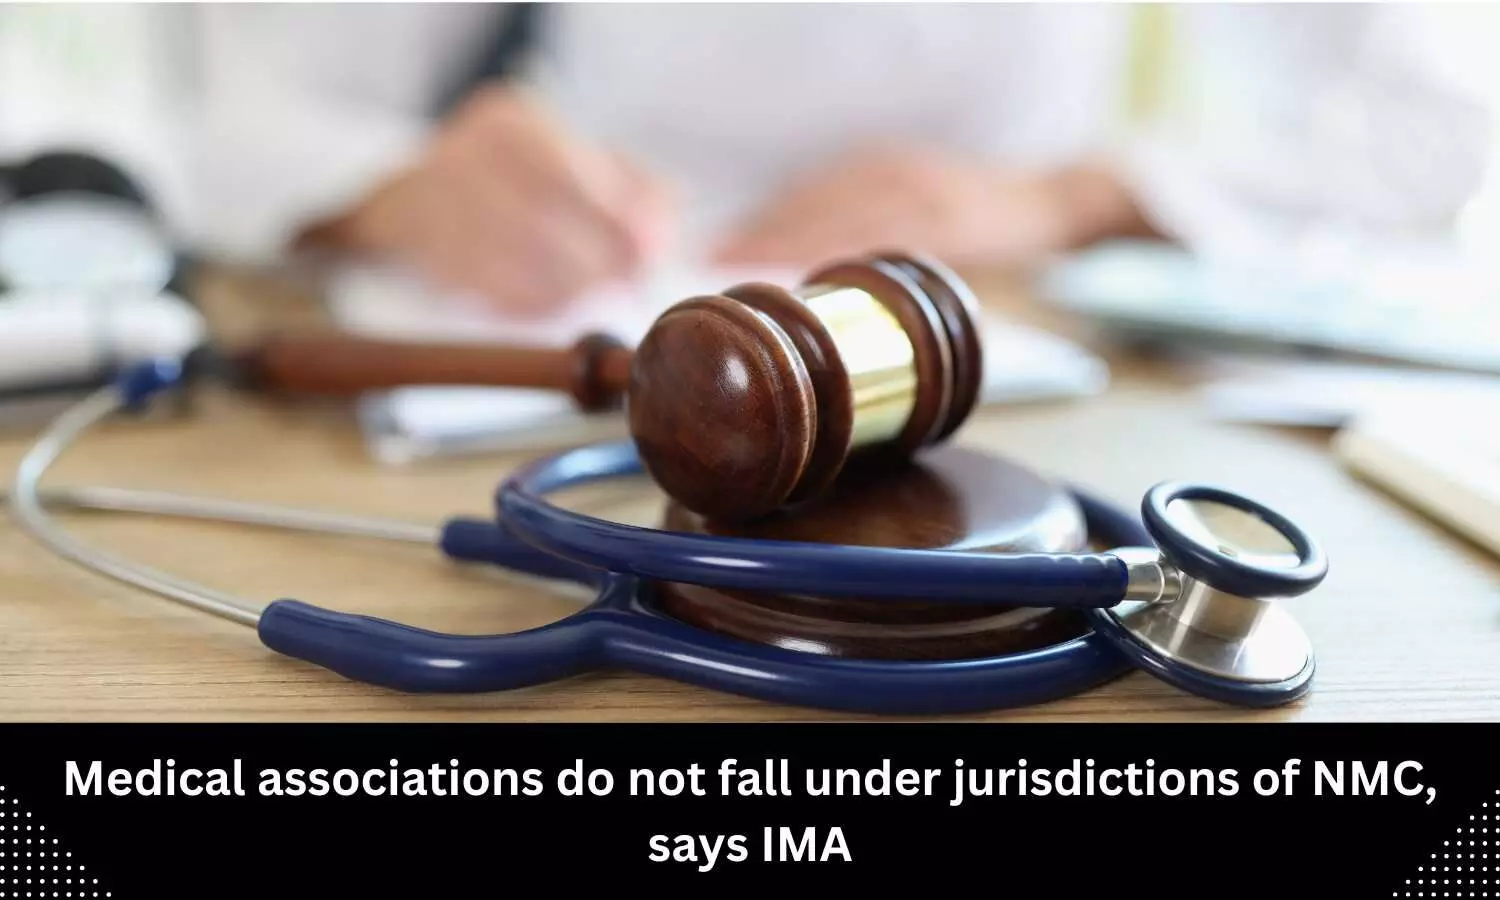 Medical associations do not fall under jurisdictions of NMC, says IMA, writes to Health Minister demanding exemption from new ethics regulations